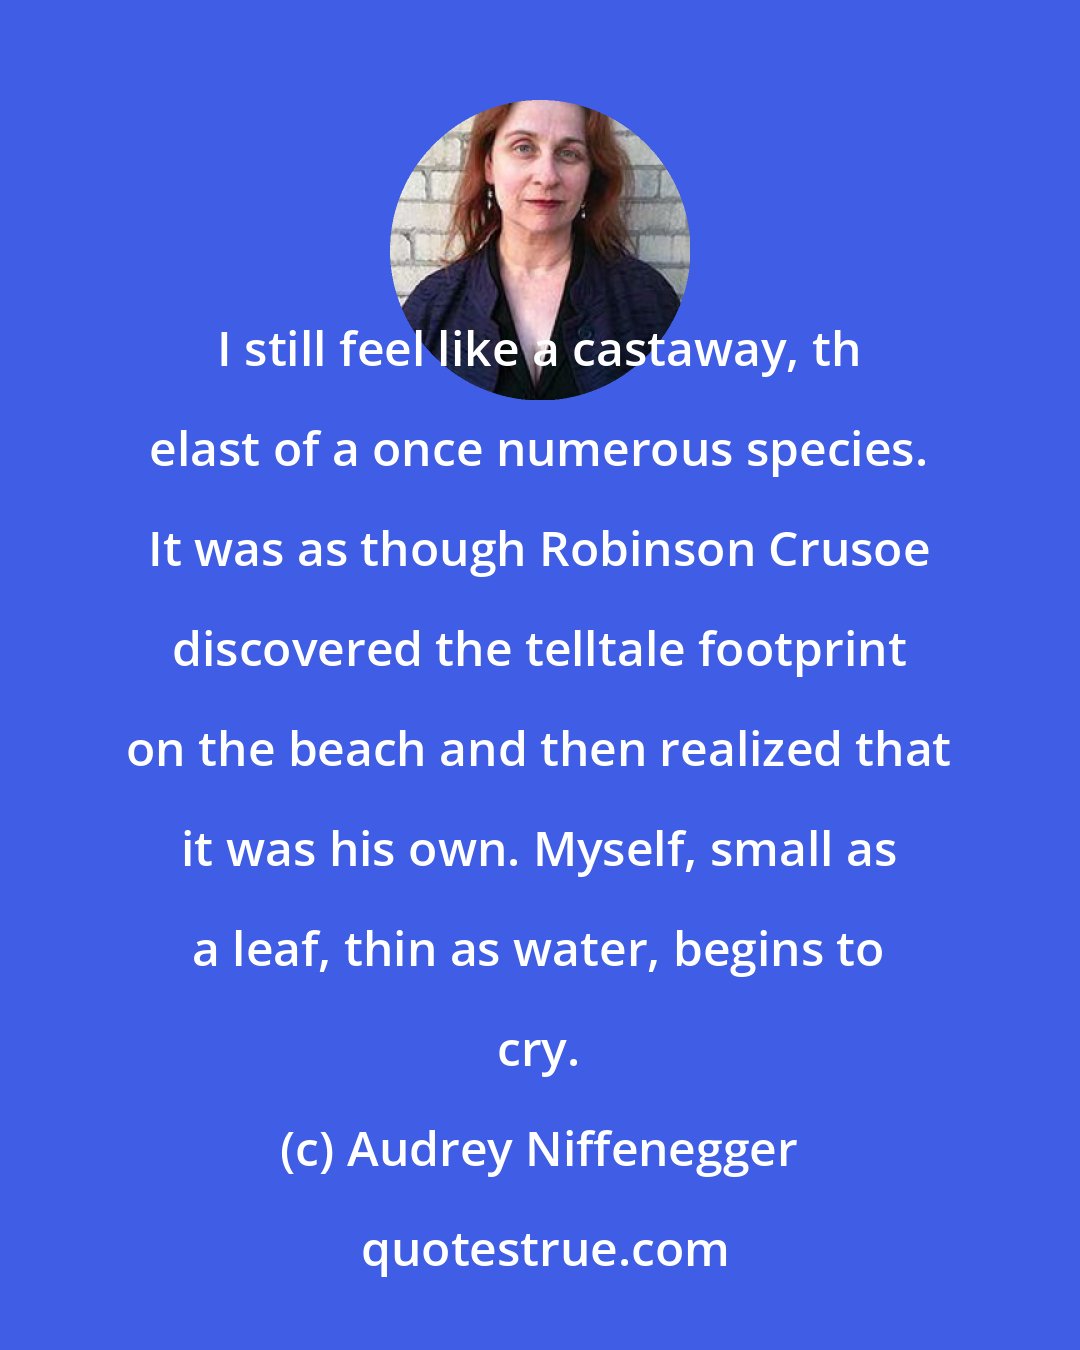 Audrey Niffenegger: I still feel like a castaway, th elast of a once numerous species. It was as though Robinson Crusoe discovered the telltale footprint on the beach and then realized that it was his own. Myself, small as a leaf, thin as water, begins to cry.